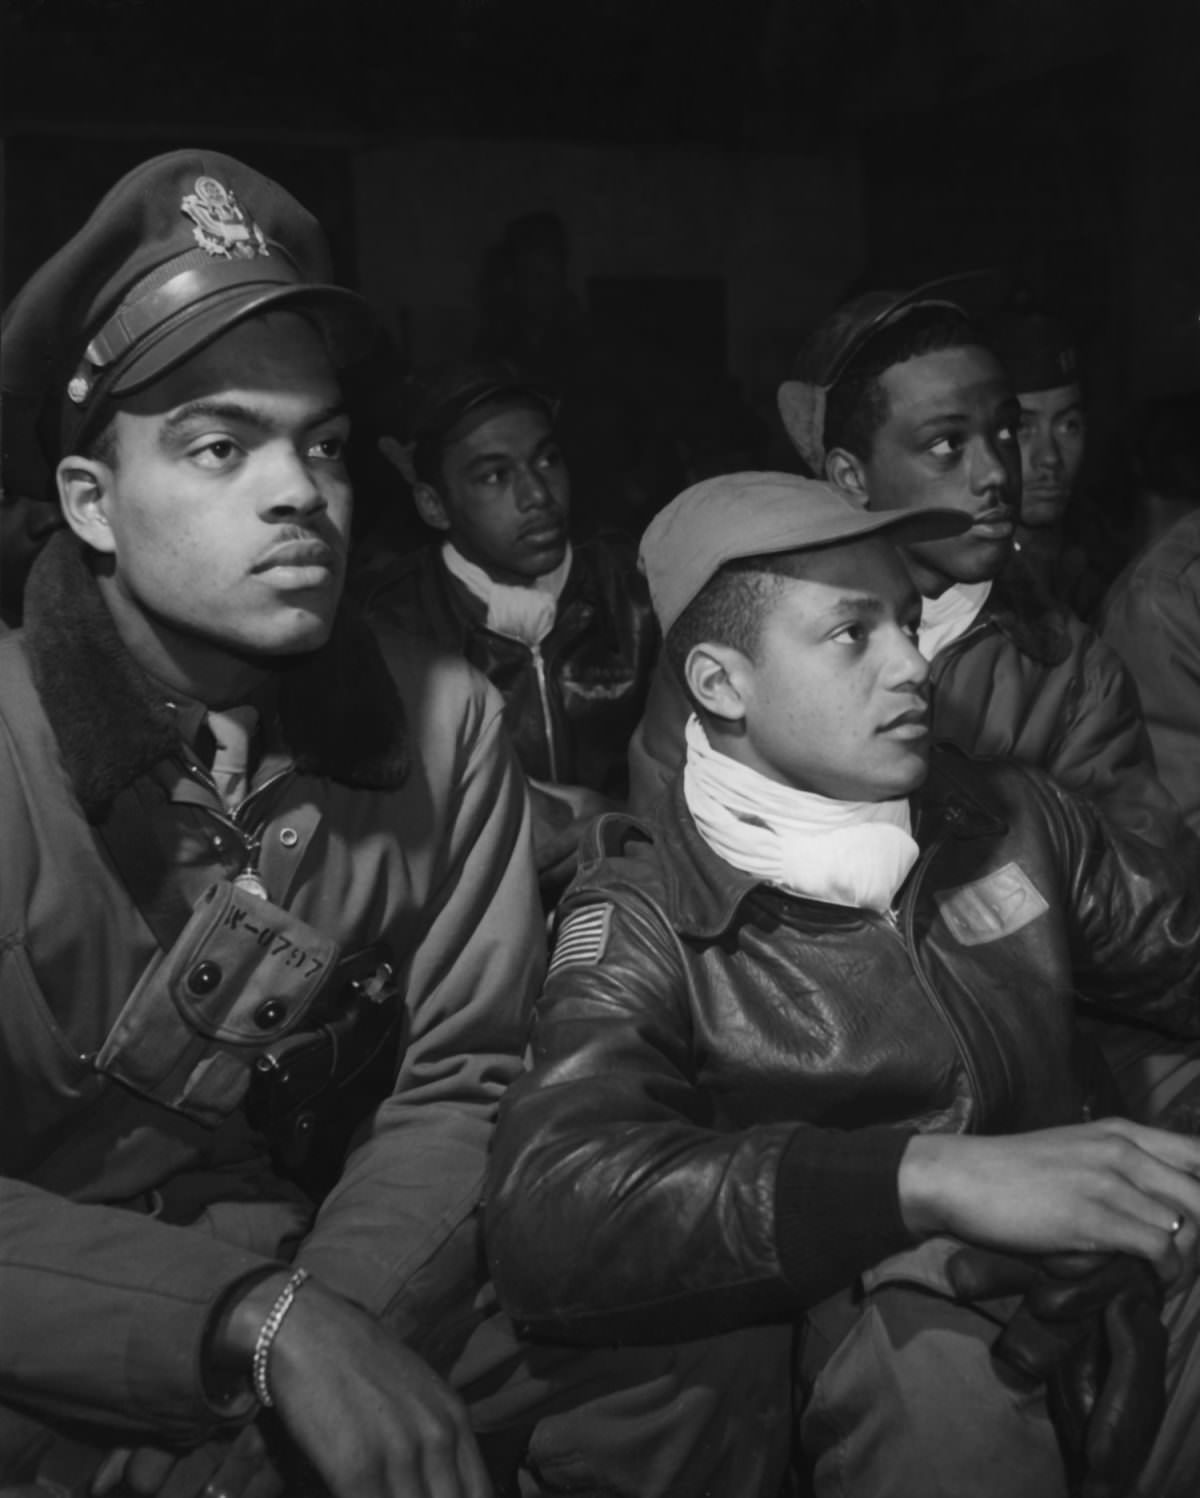 Tuskegee Airmen 332nd Fighter Group pilots during the Second World War.